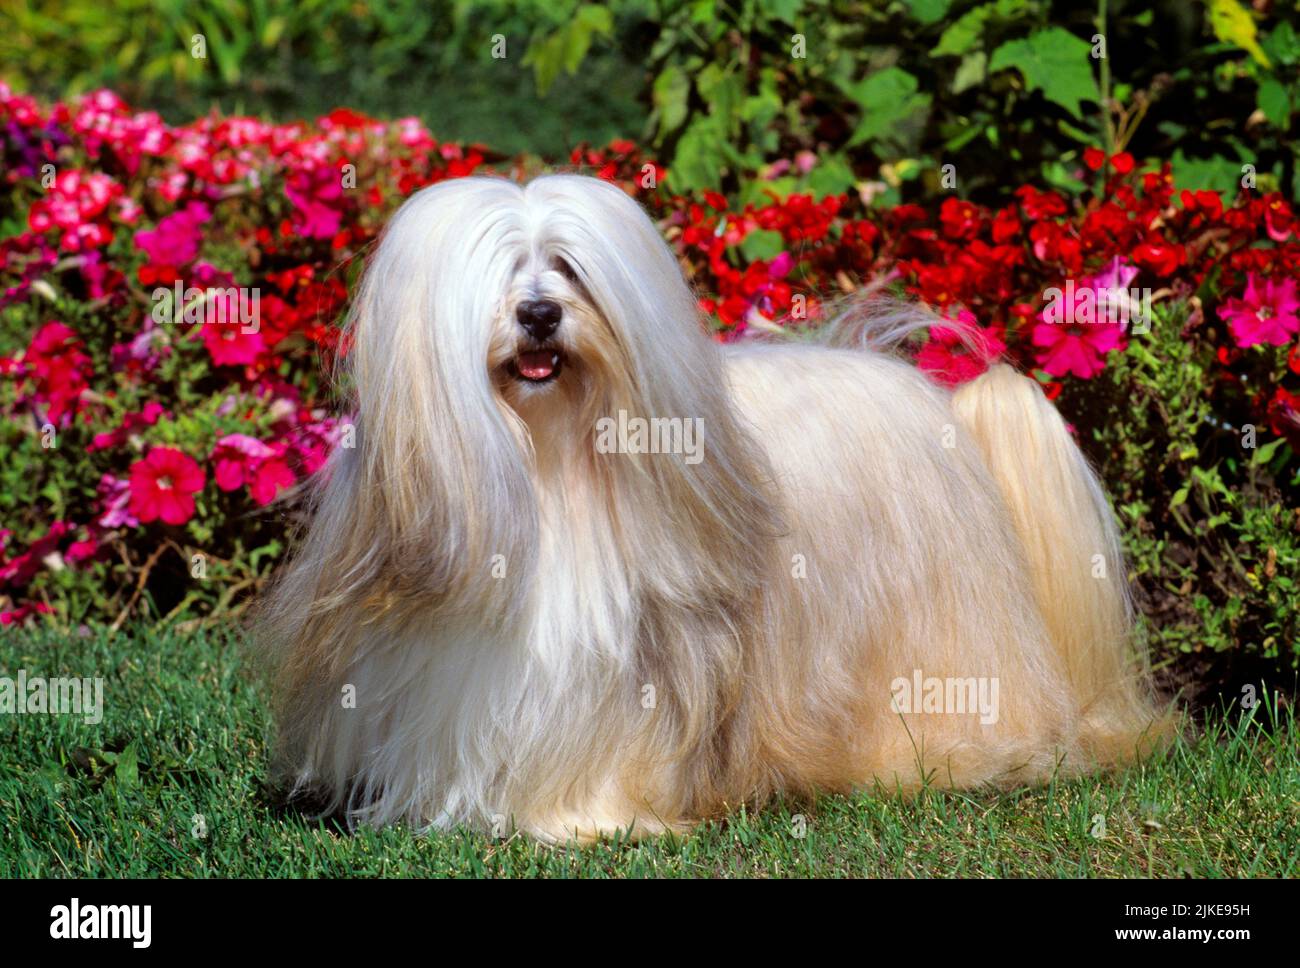 1990s LLASA APSO DOG LOOKING AT CAMERA STANDING IN FRONT OF PETUNIA FLOWERS - kd6676 HFF002 HARS MAMMAL PETUNIA 1933 IN FRONT OLD FASHIONED SENTINEL Stock Photo